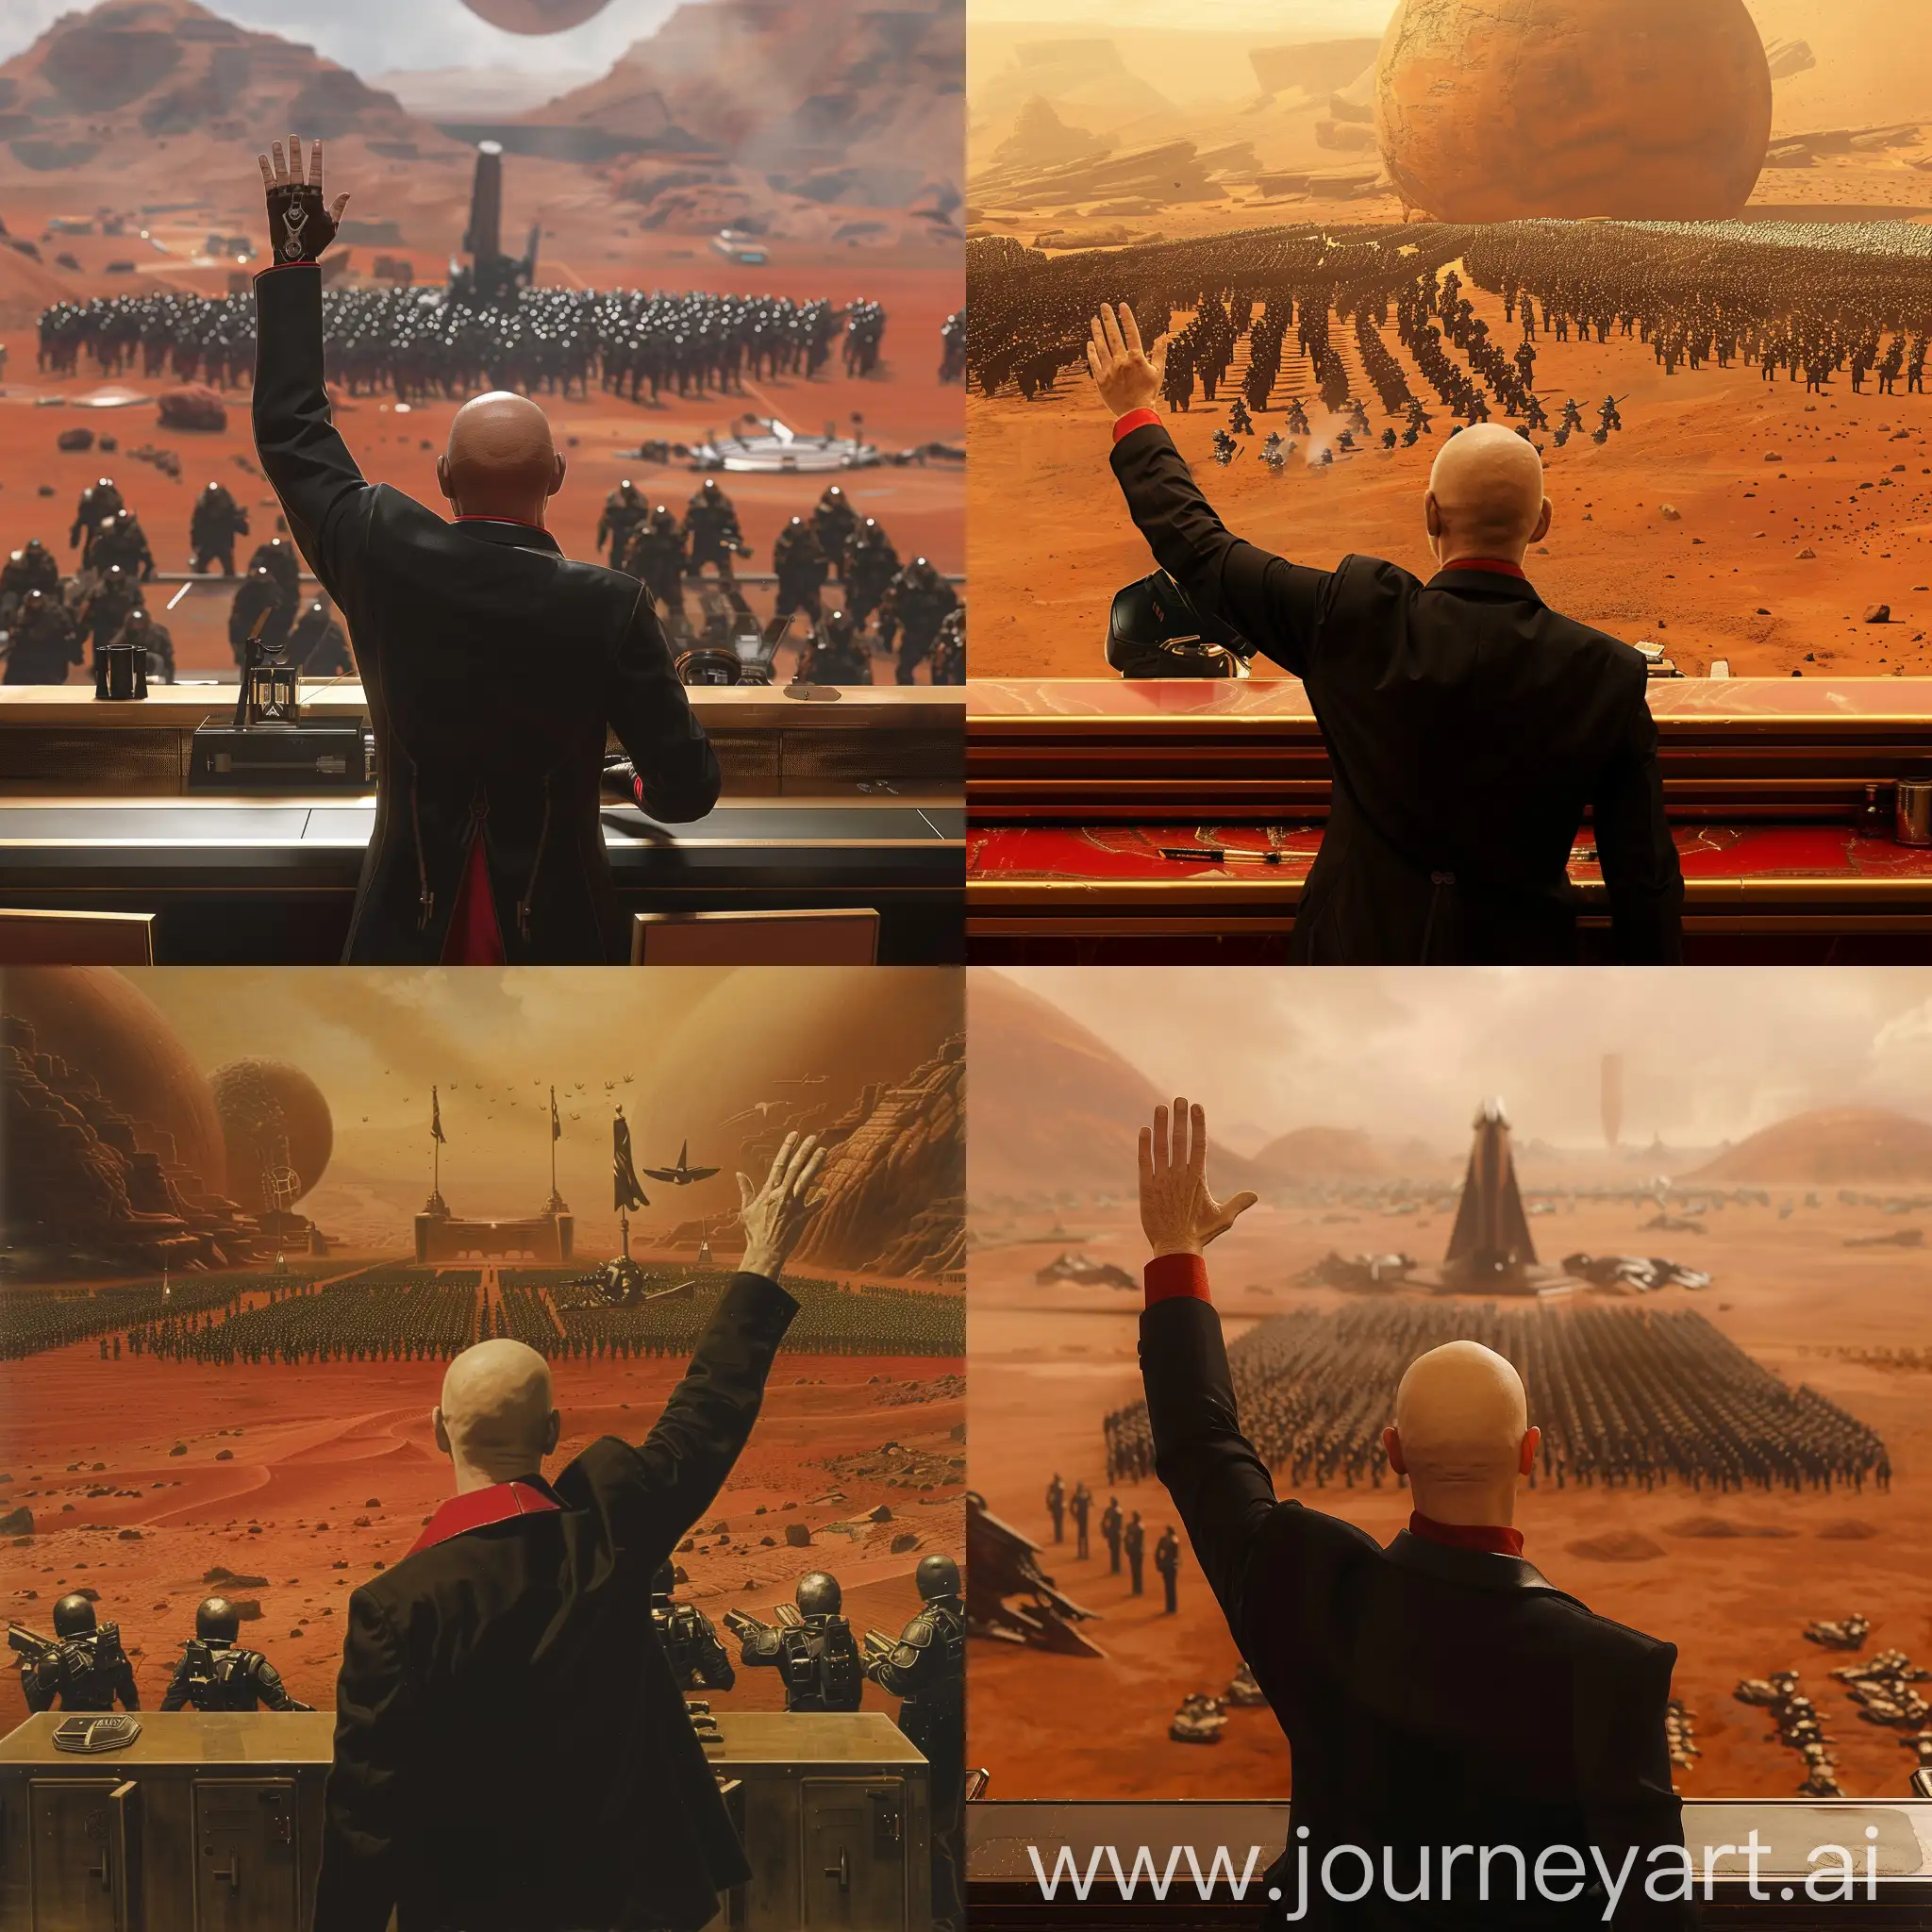 bald noble man in a black suit and red shirt raised his hand up behind the counter in front of a huge army from below on a deserted red planet sci-fi style 